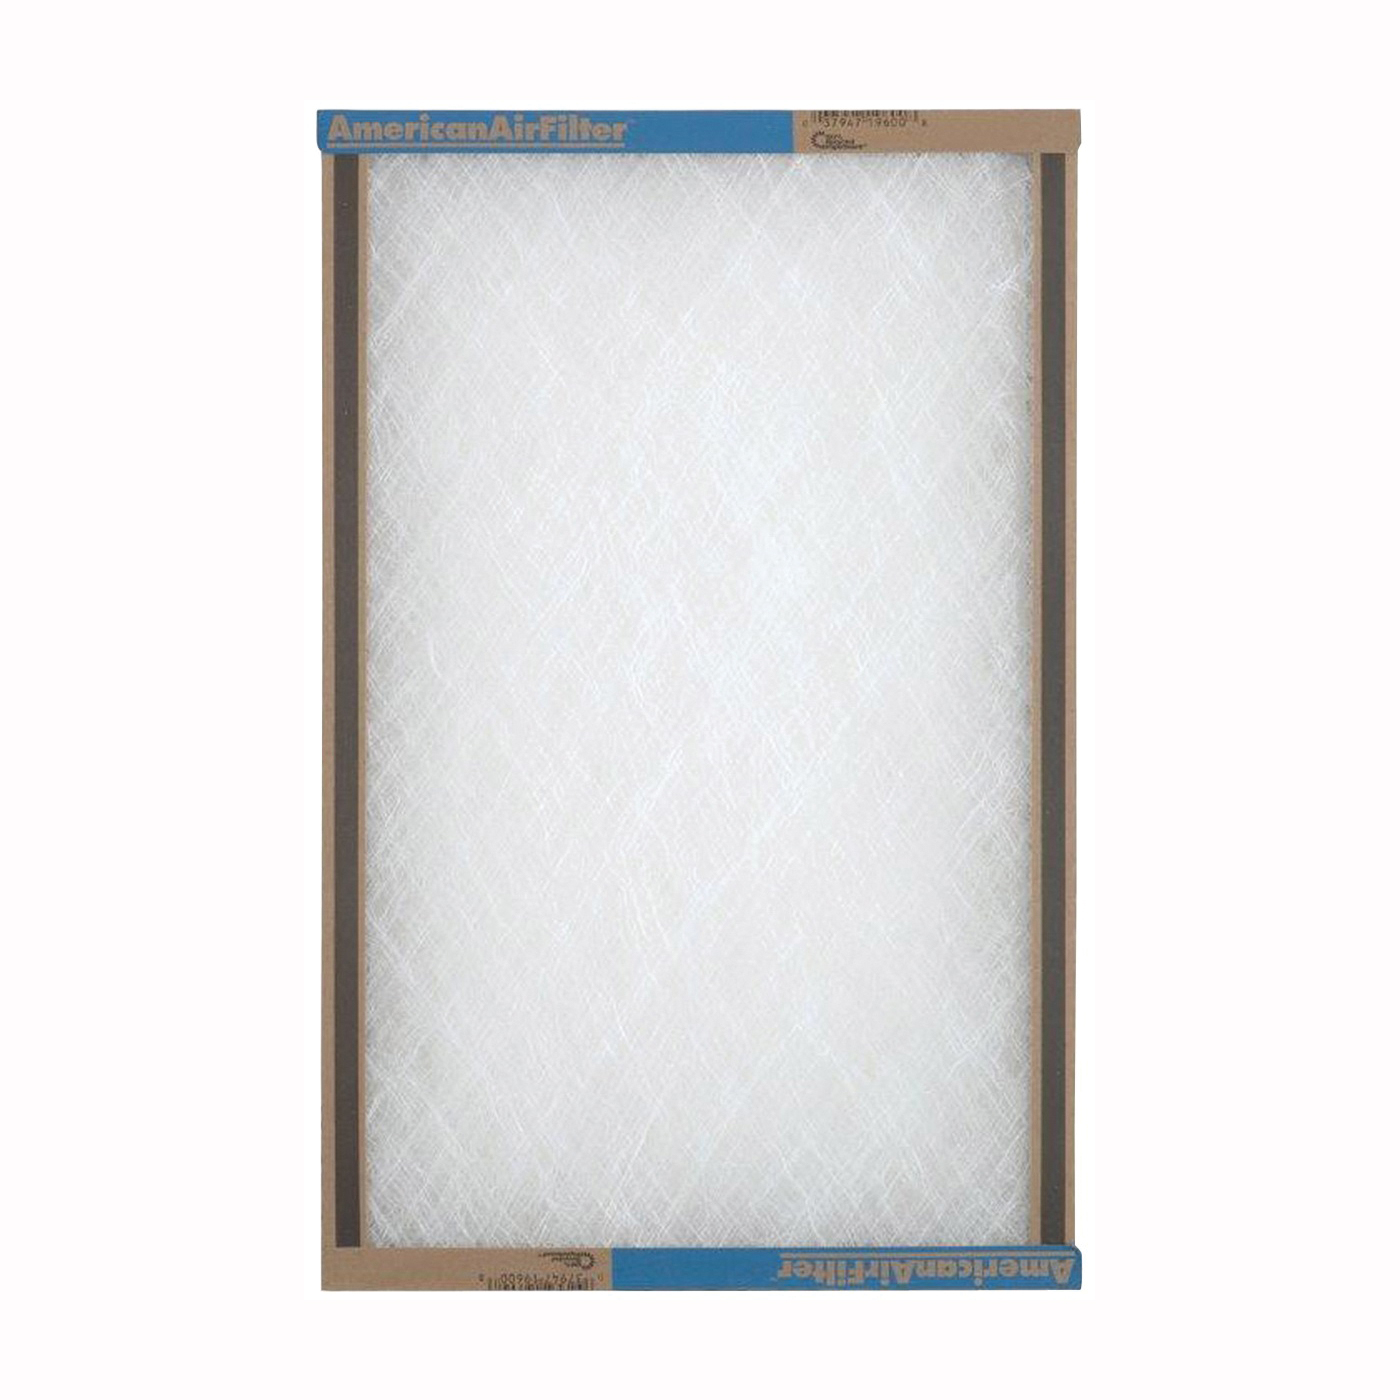 220-600-051 Panel Filter, 25 in L, 16 in W, Chipboard Frame